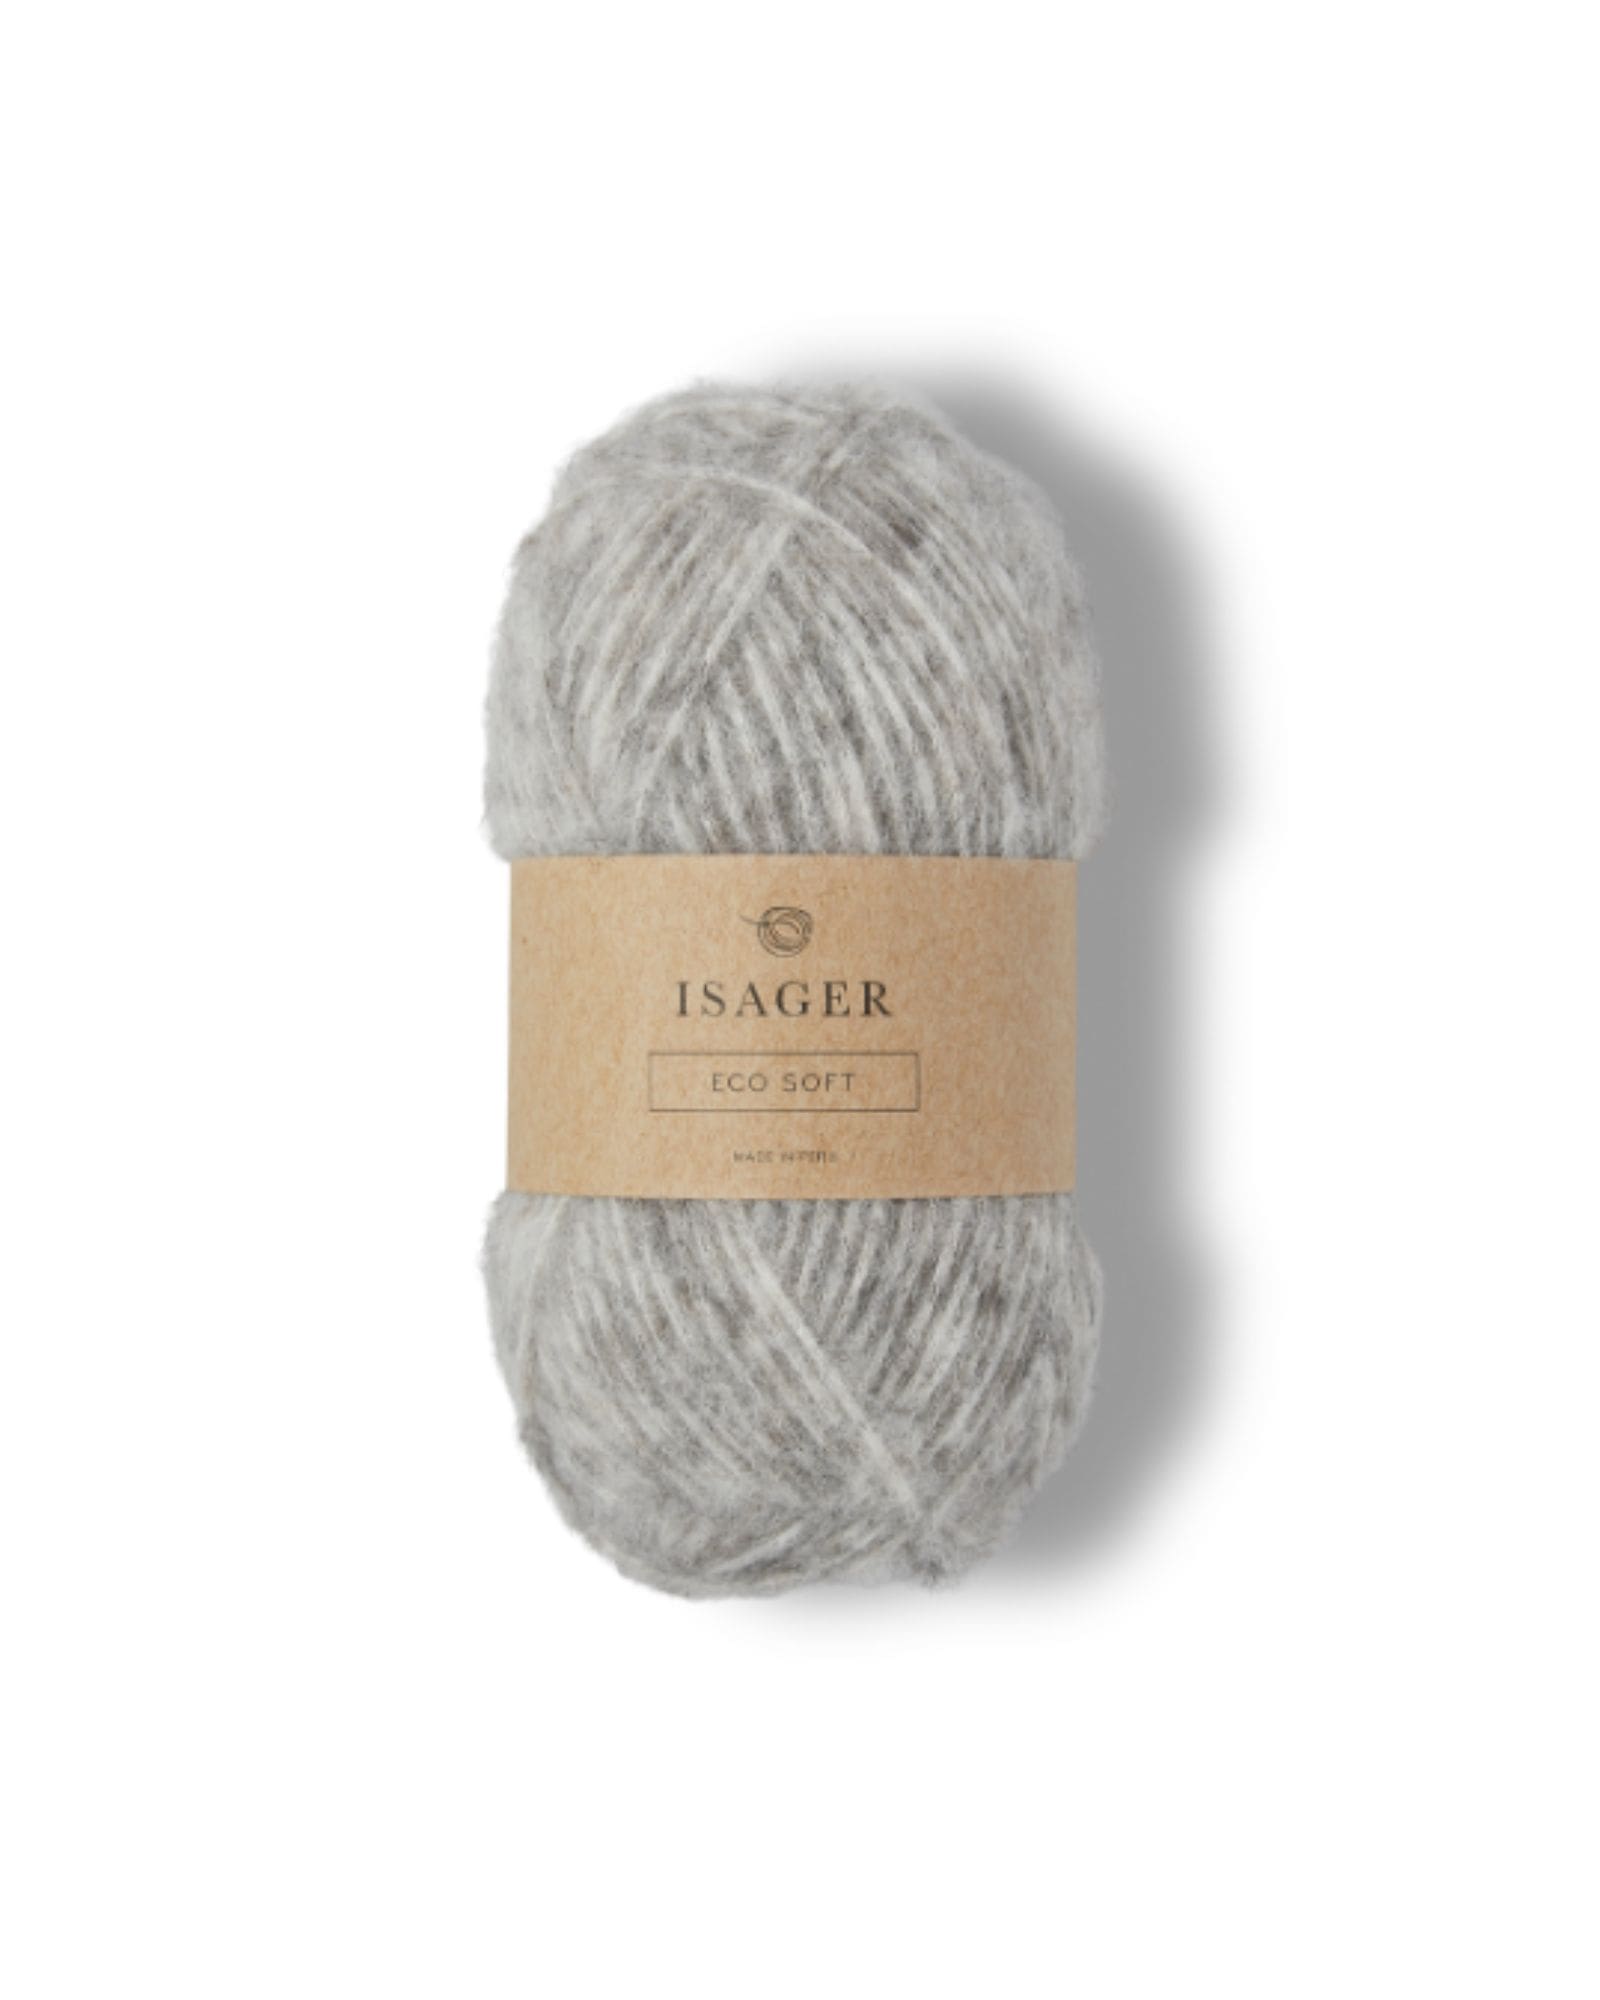 isager-eco-soft-e2s